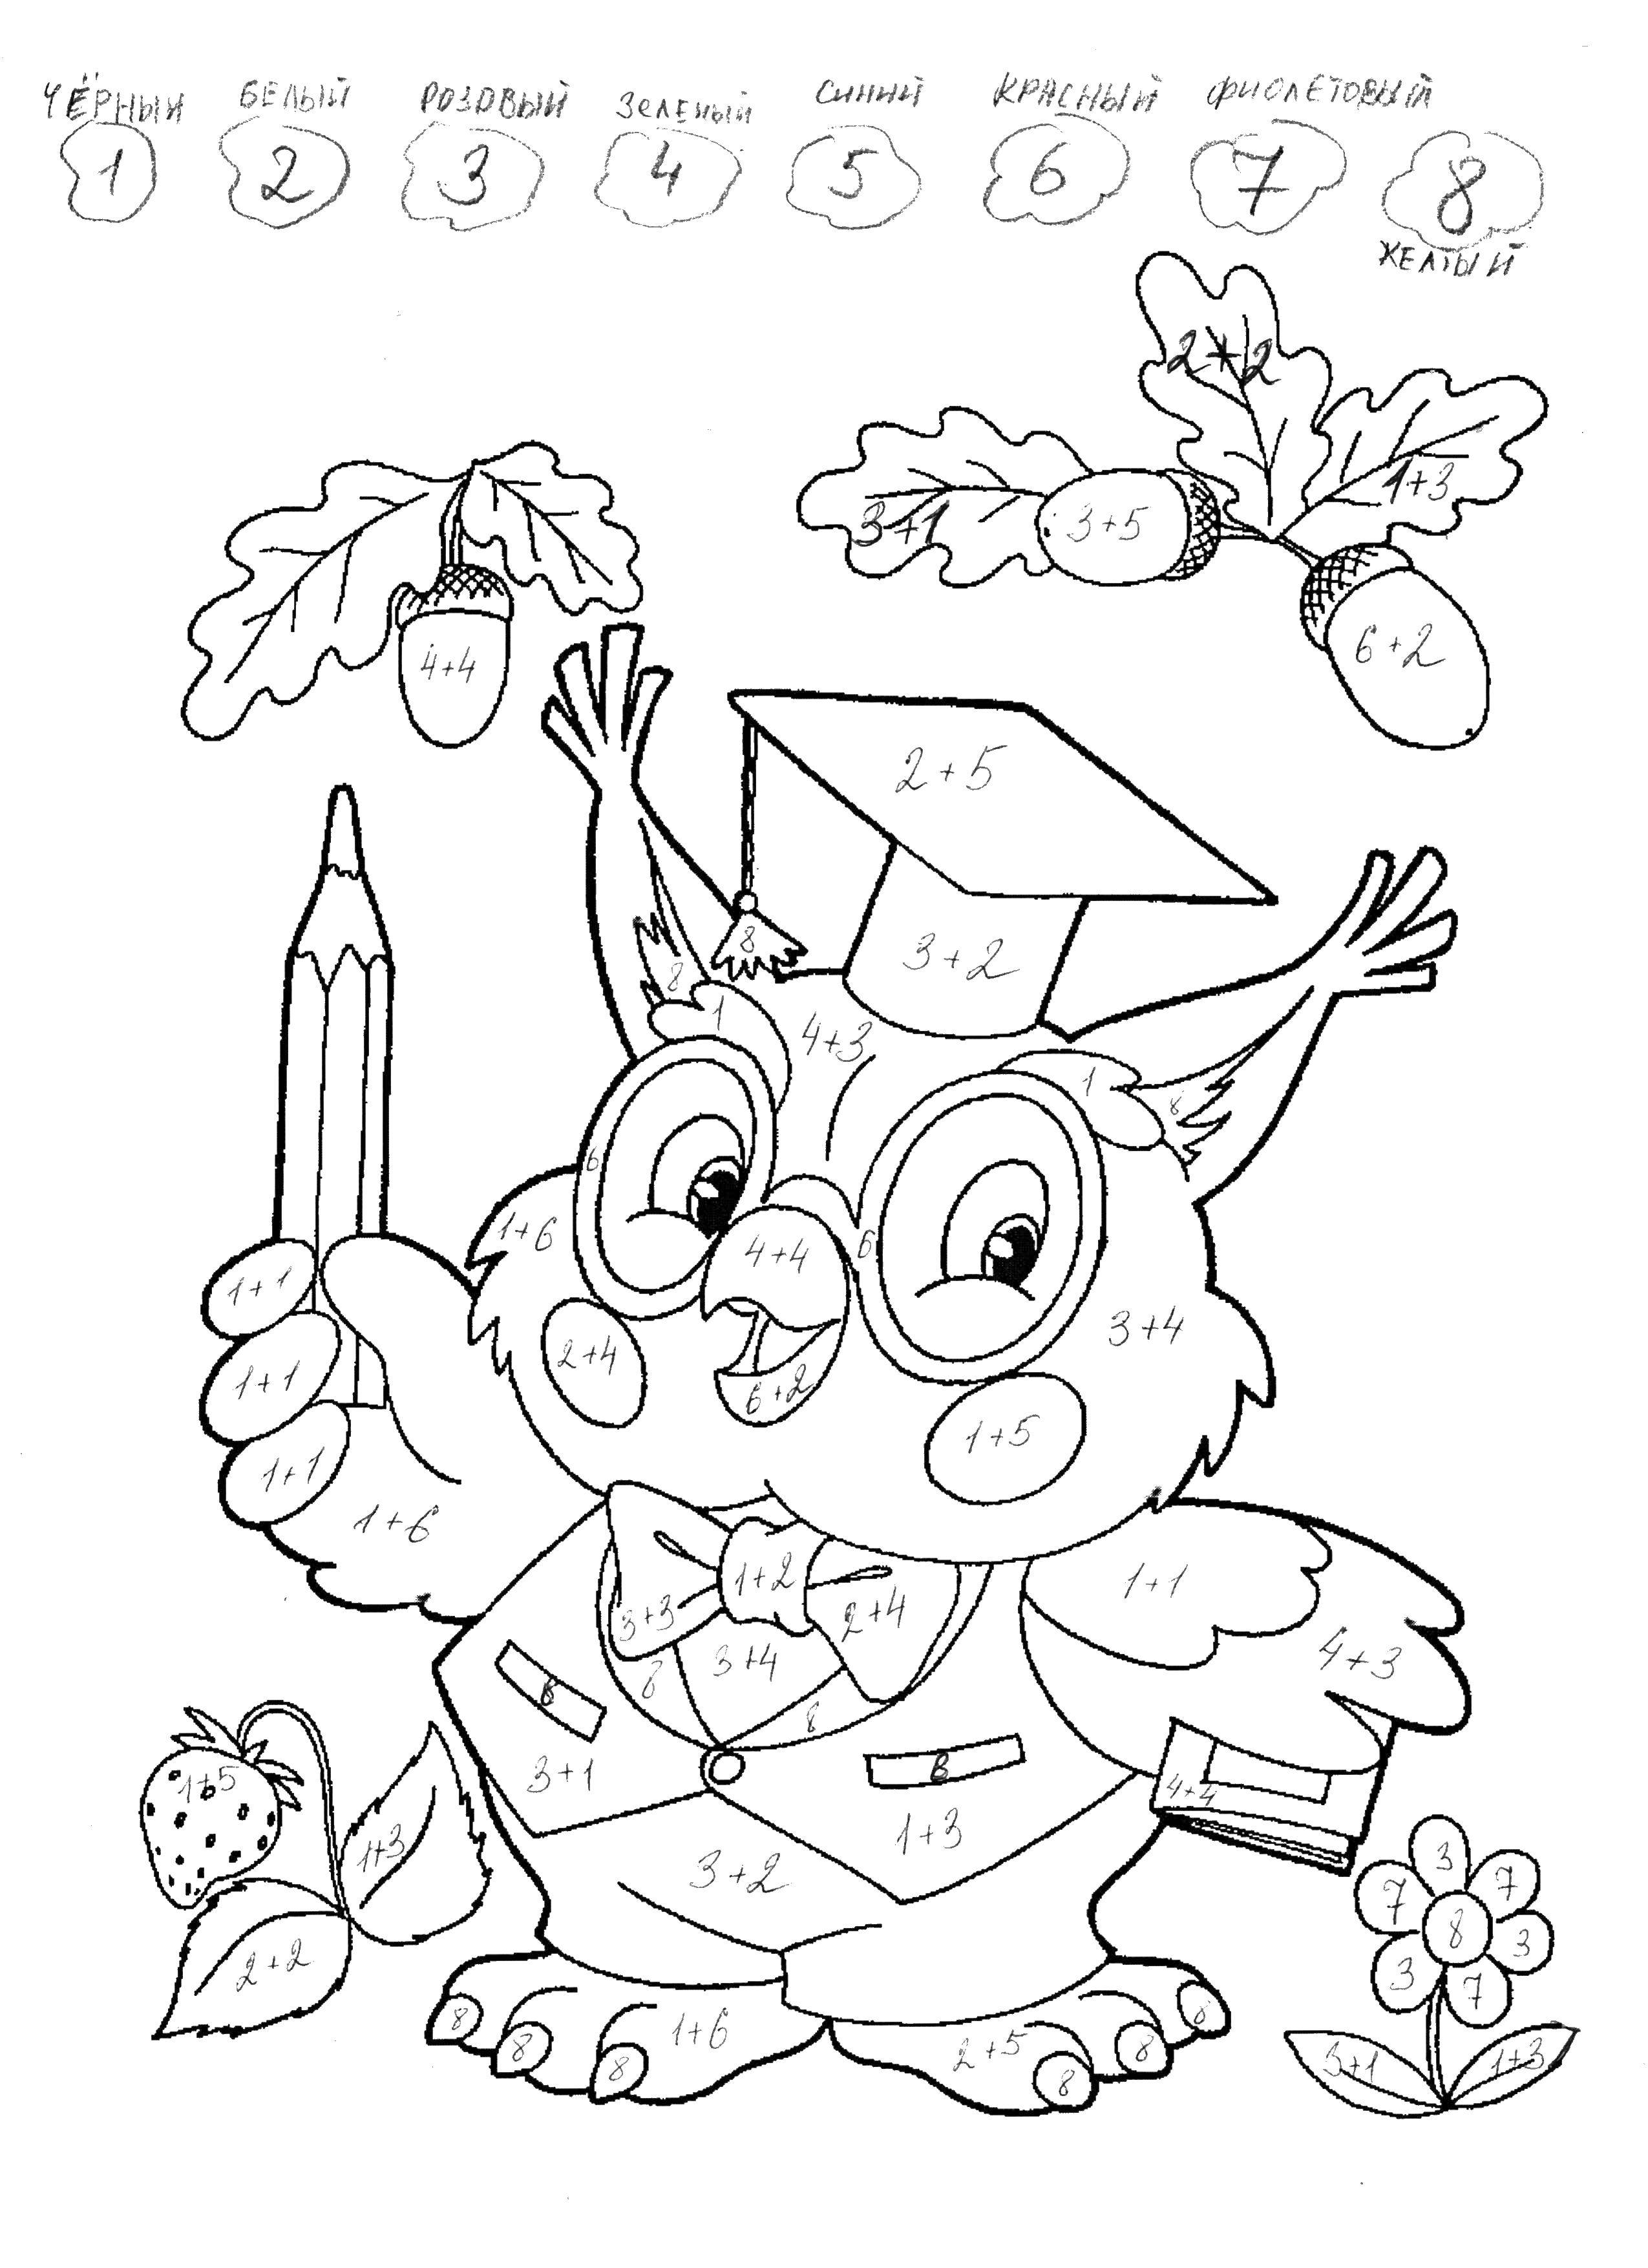 Coloring Clever owl. Category mathematical coloring pages. Tags:  mathematics, mystery.